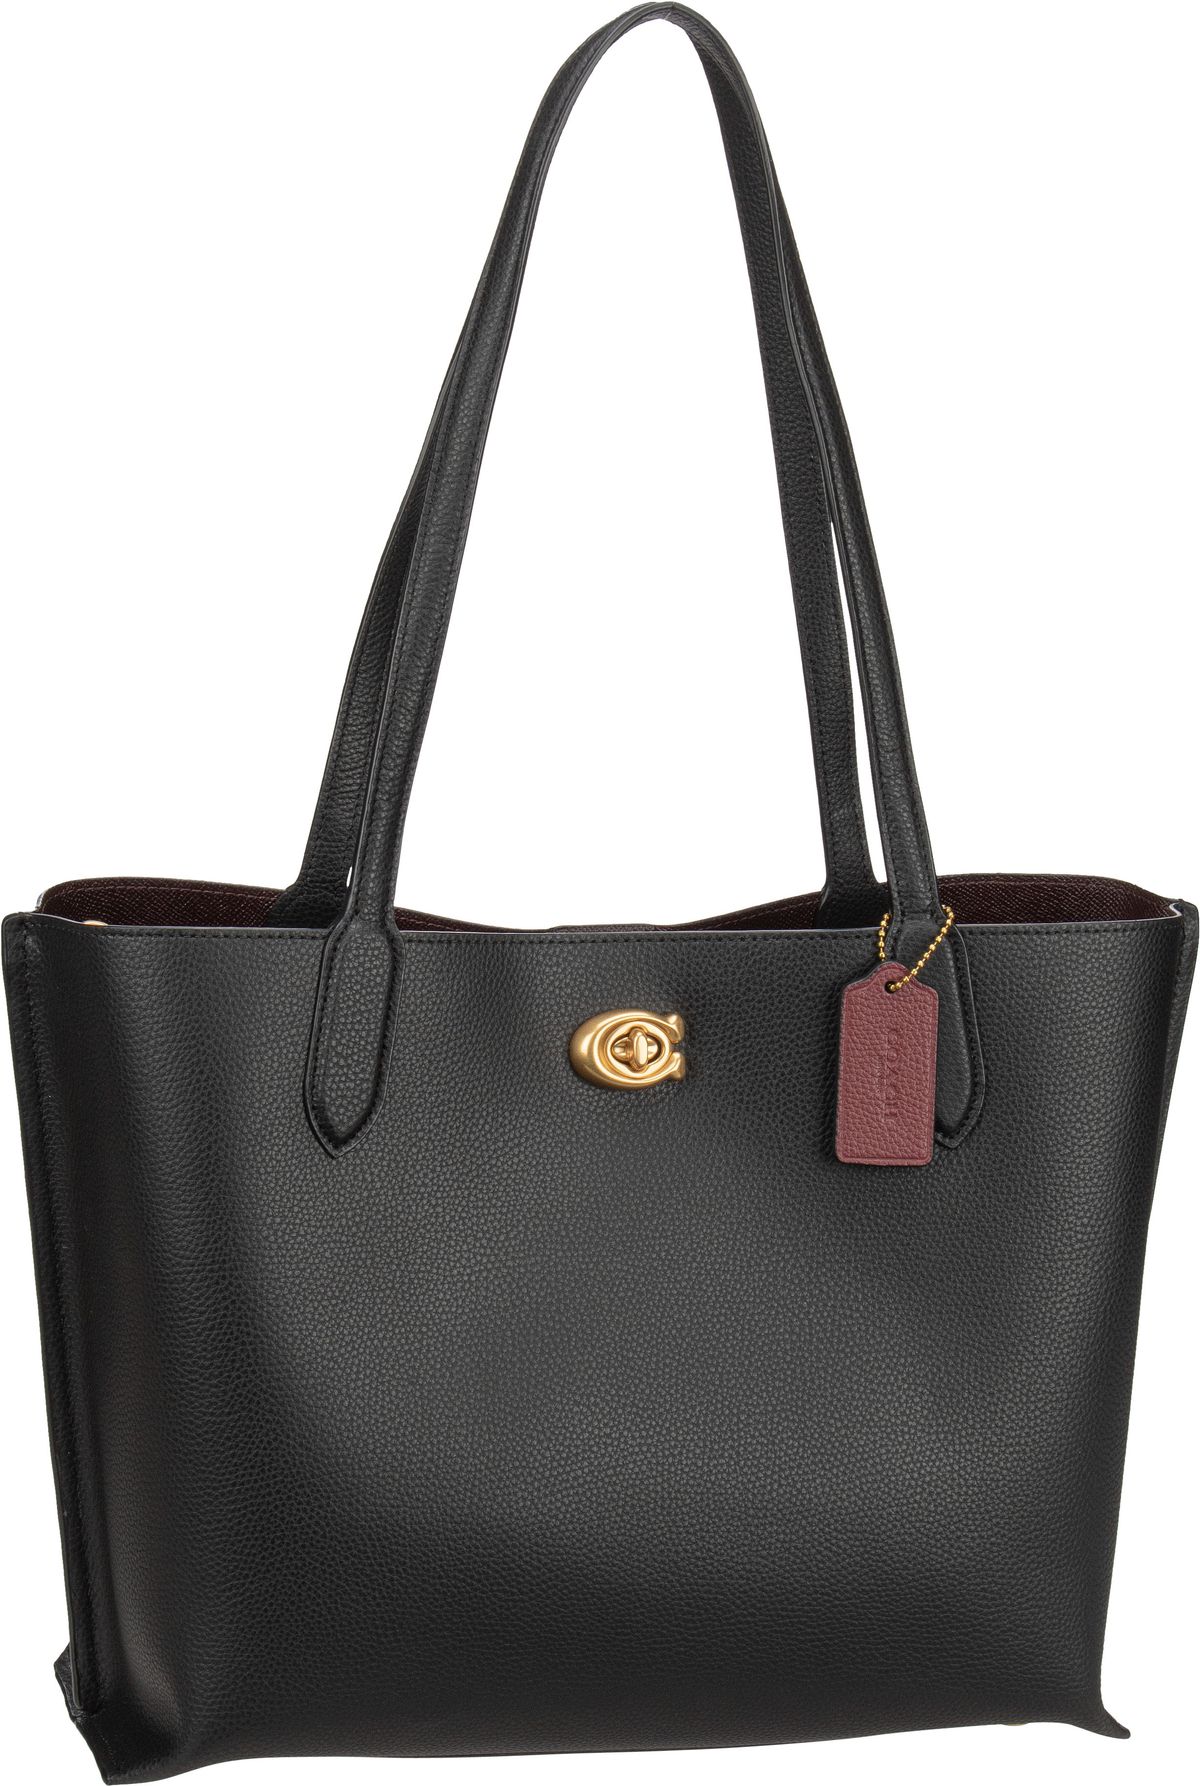 COACH Willow Tote Polished Pebble - Black